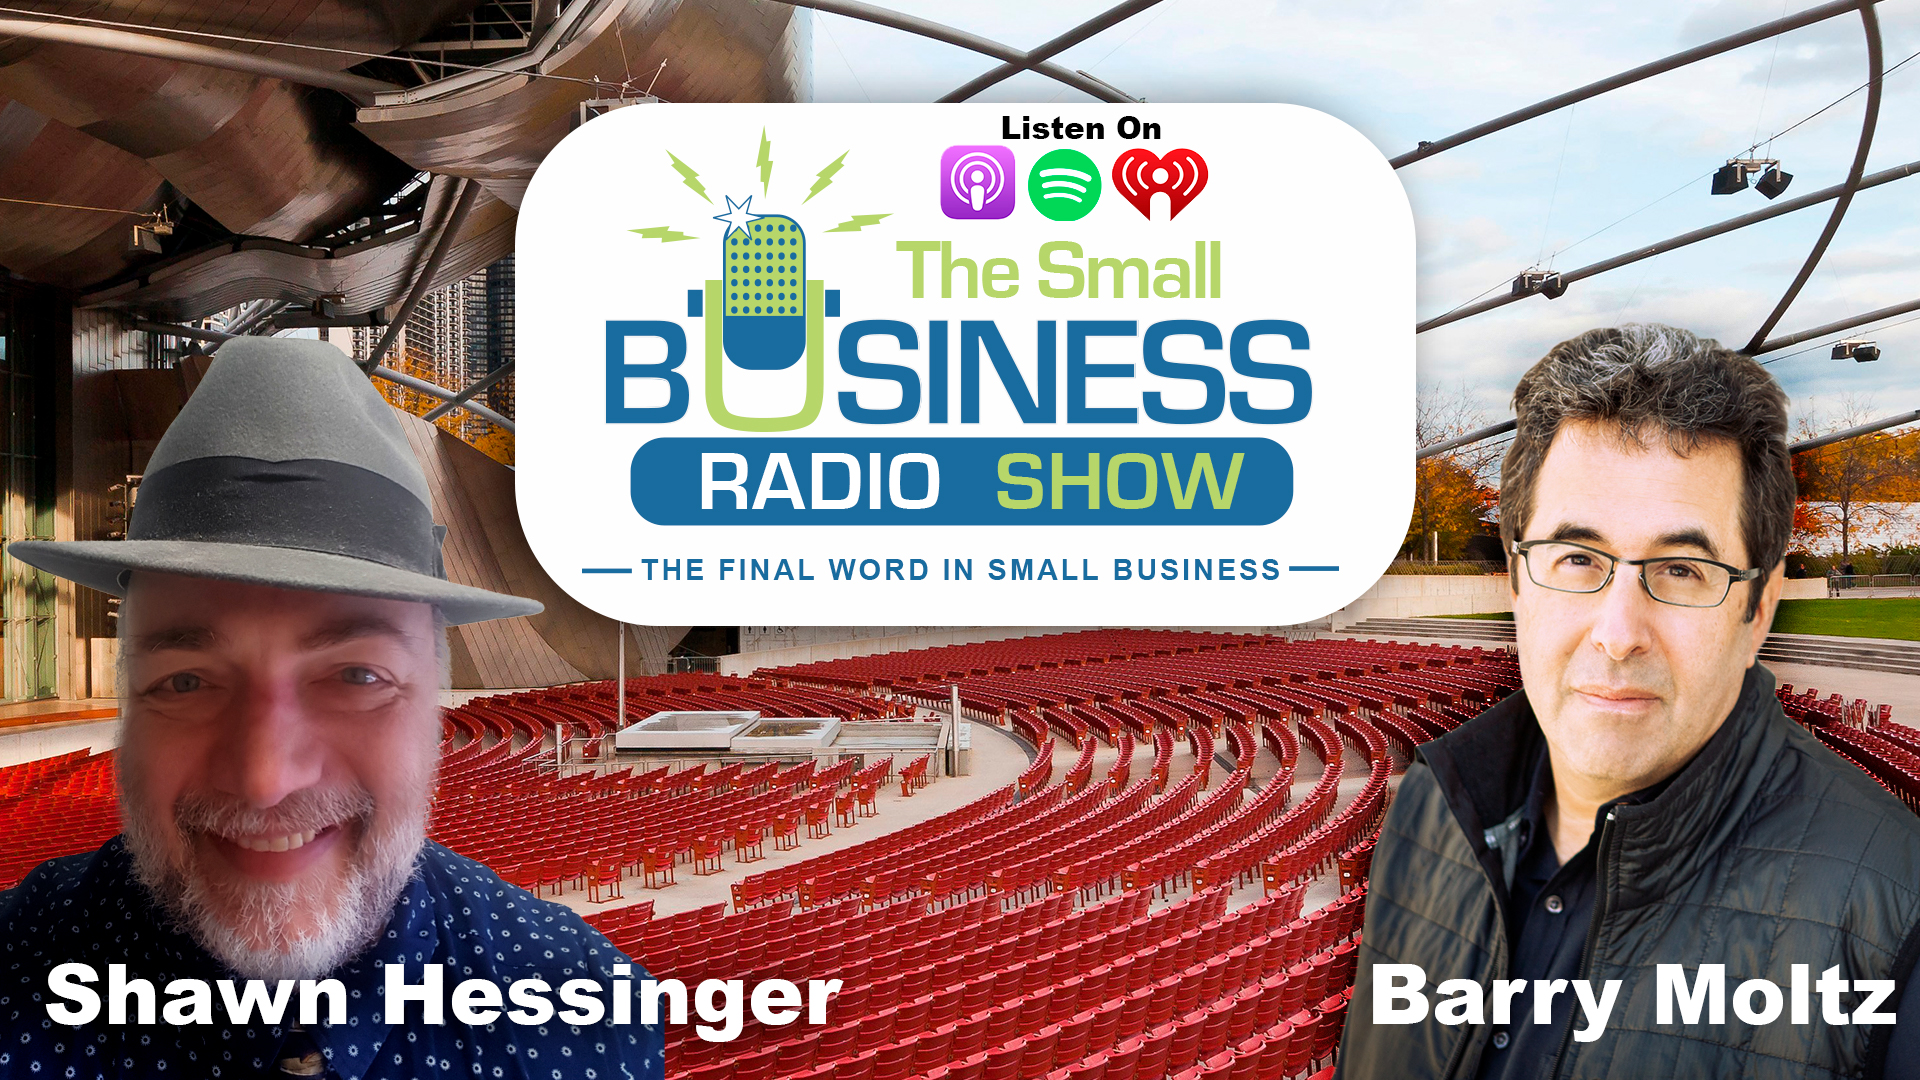 Shawn Hessinger on The Small Business Radio Show